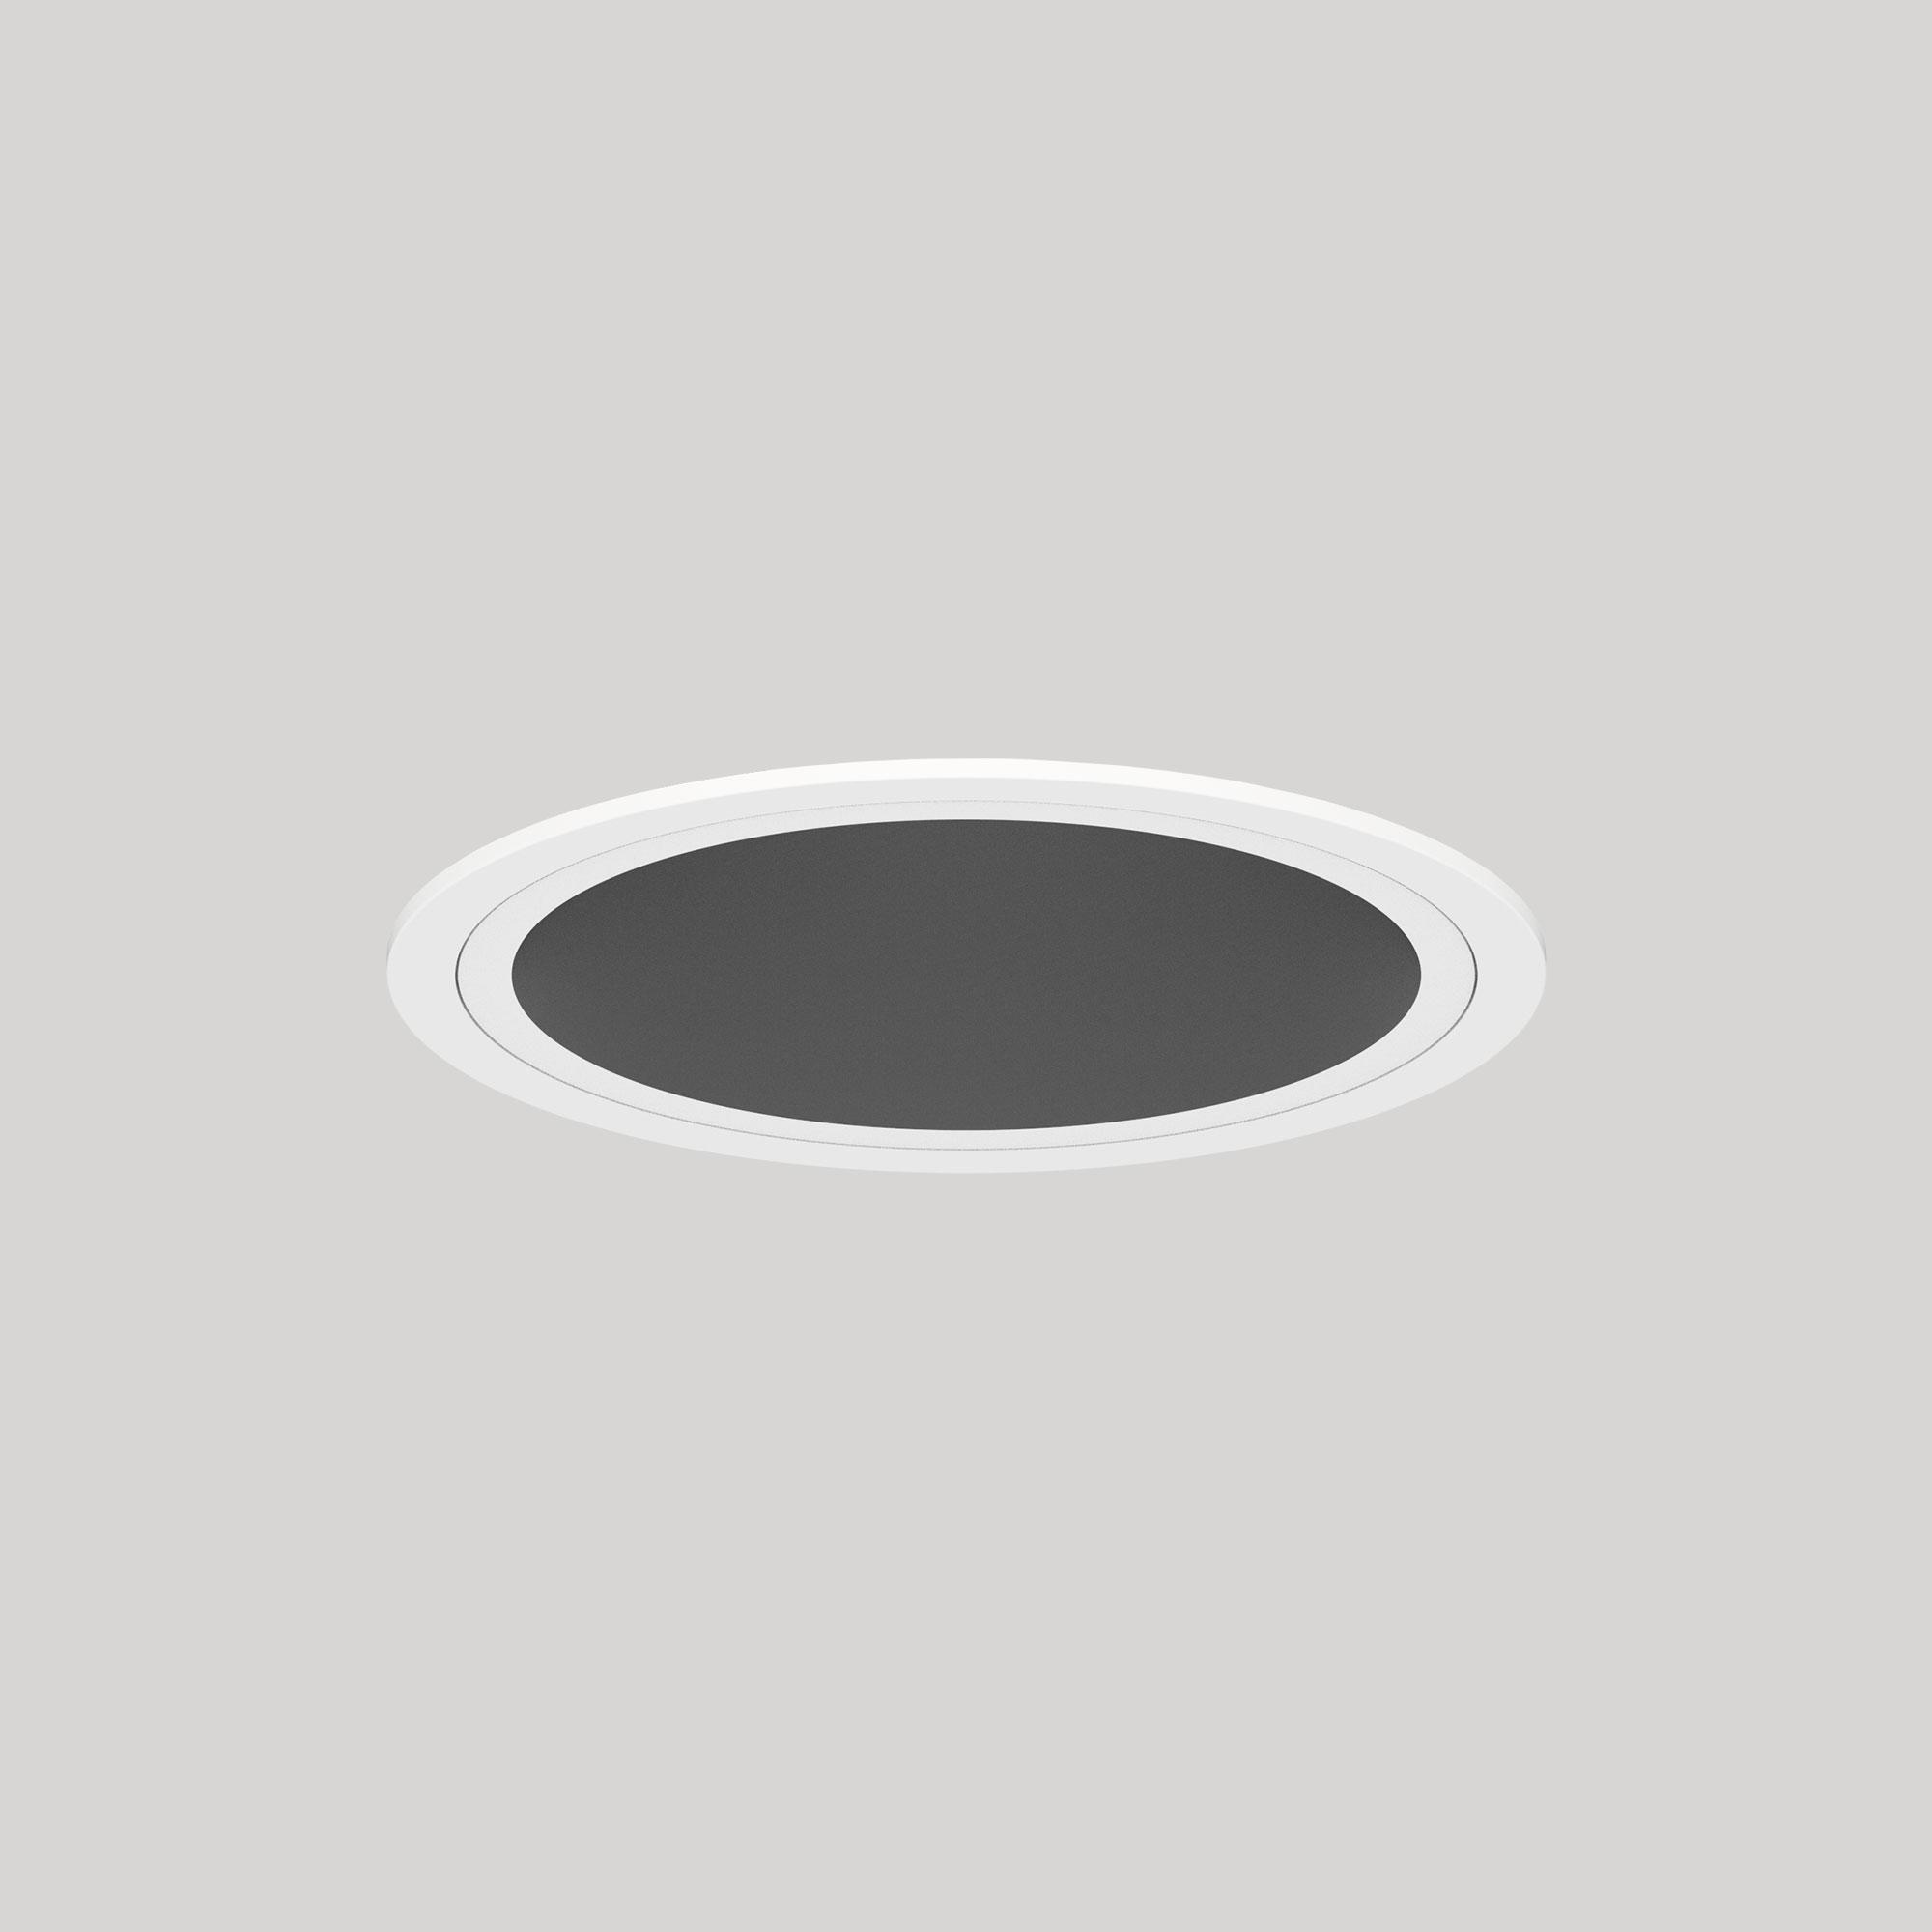 Standard 114mm Ceiling Recessed Round Fixed STD-E01C1I-WBP - Standard-STD-E01-WB-Installed.jpg